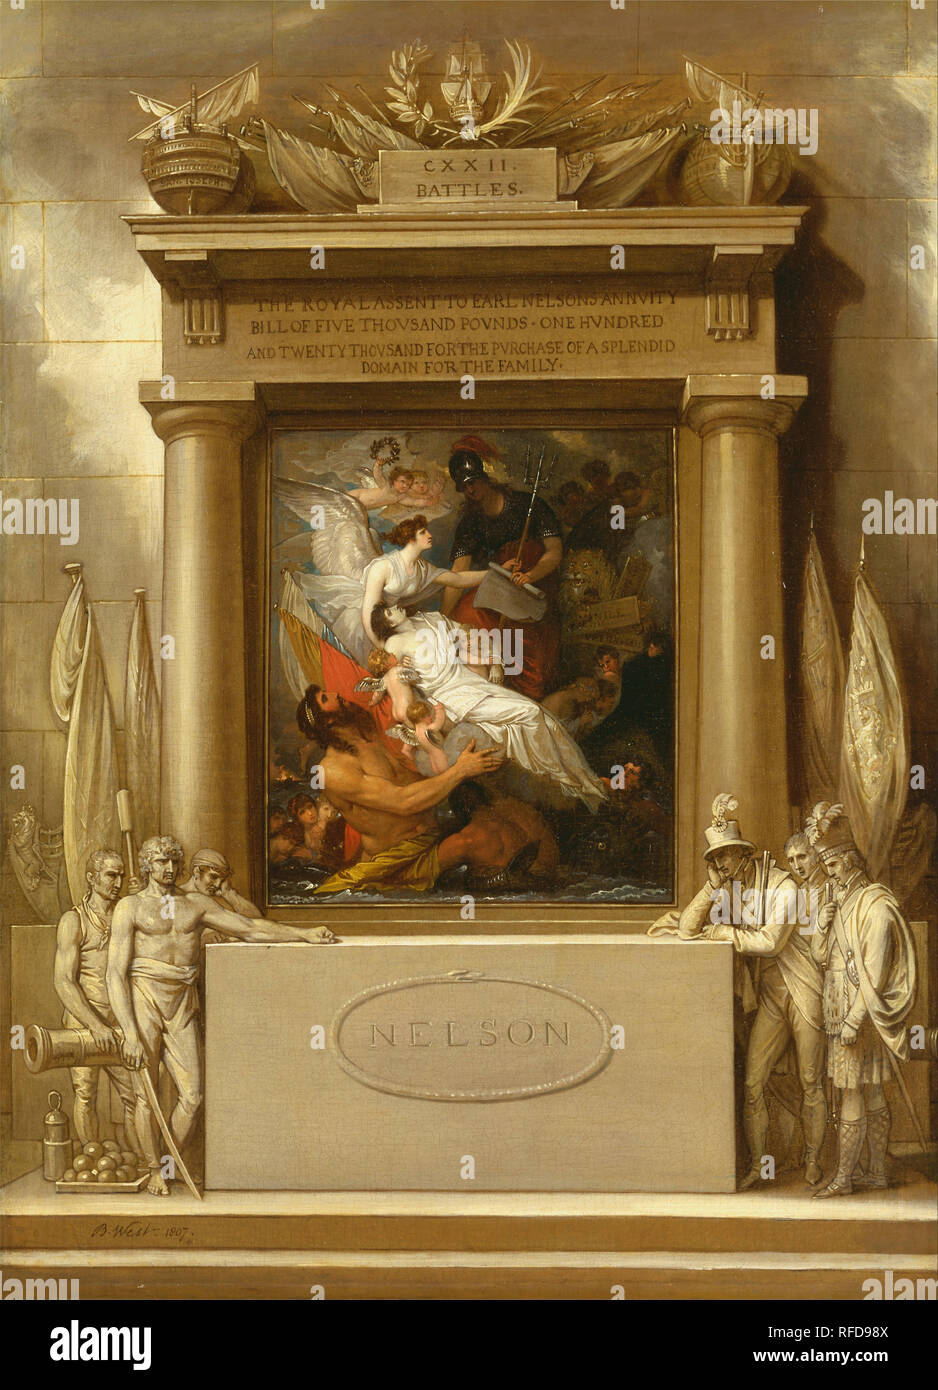 The Apotheosis of Nelson. Date/Period: 1807. Painting. Oil on canvas. Height: 1,003 mm (39.48 in); Width: 737 mm (29.01 in). Author: Benjamin West. WEST, BENJAMIN. Stock Photo